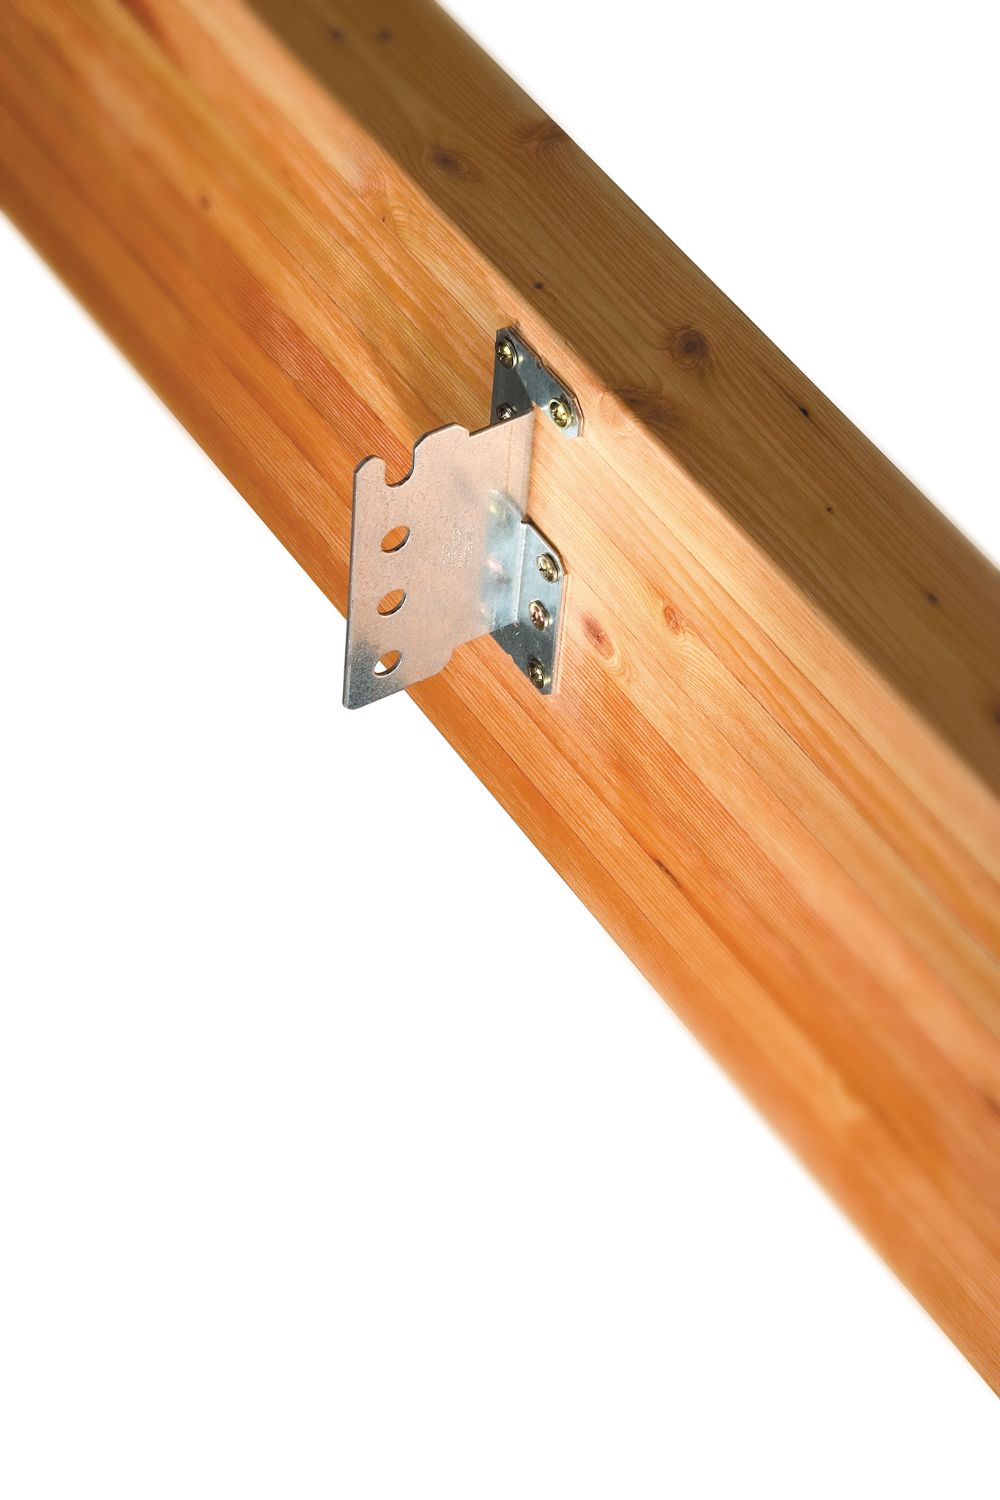 Simpson CJT4ZL Concealed Joist Tie w Long Pins ZMAX Finish image 2 of 5